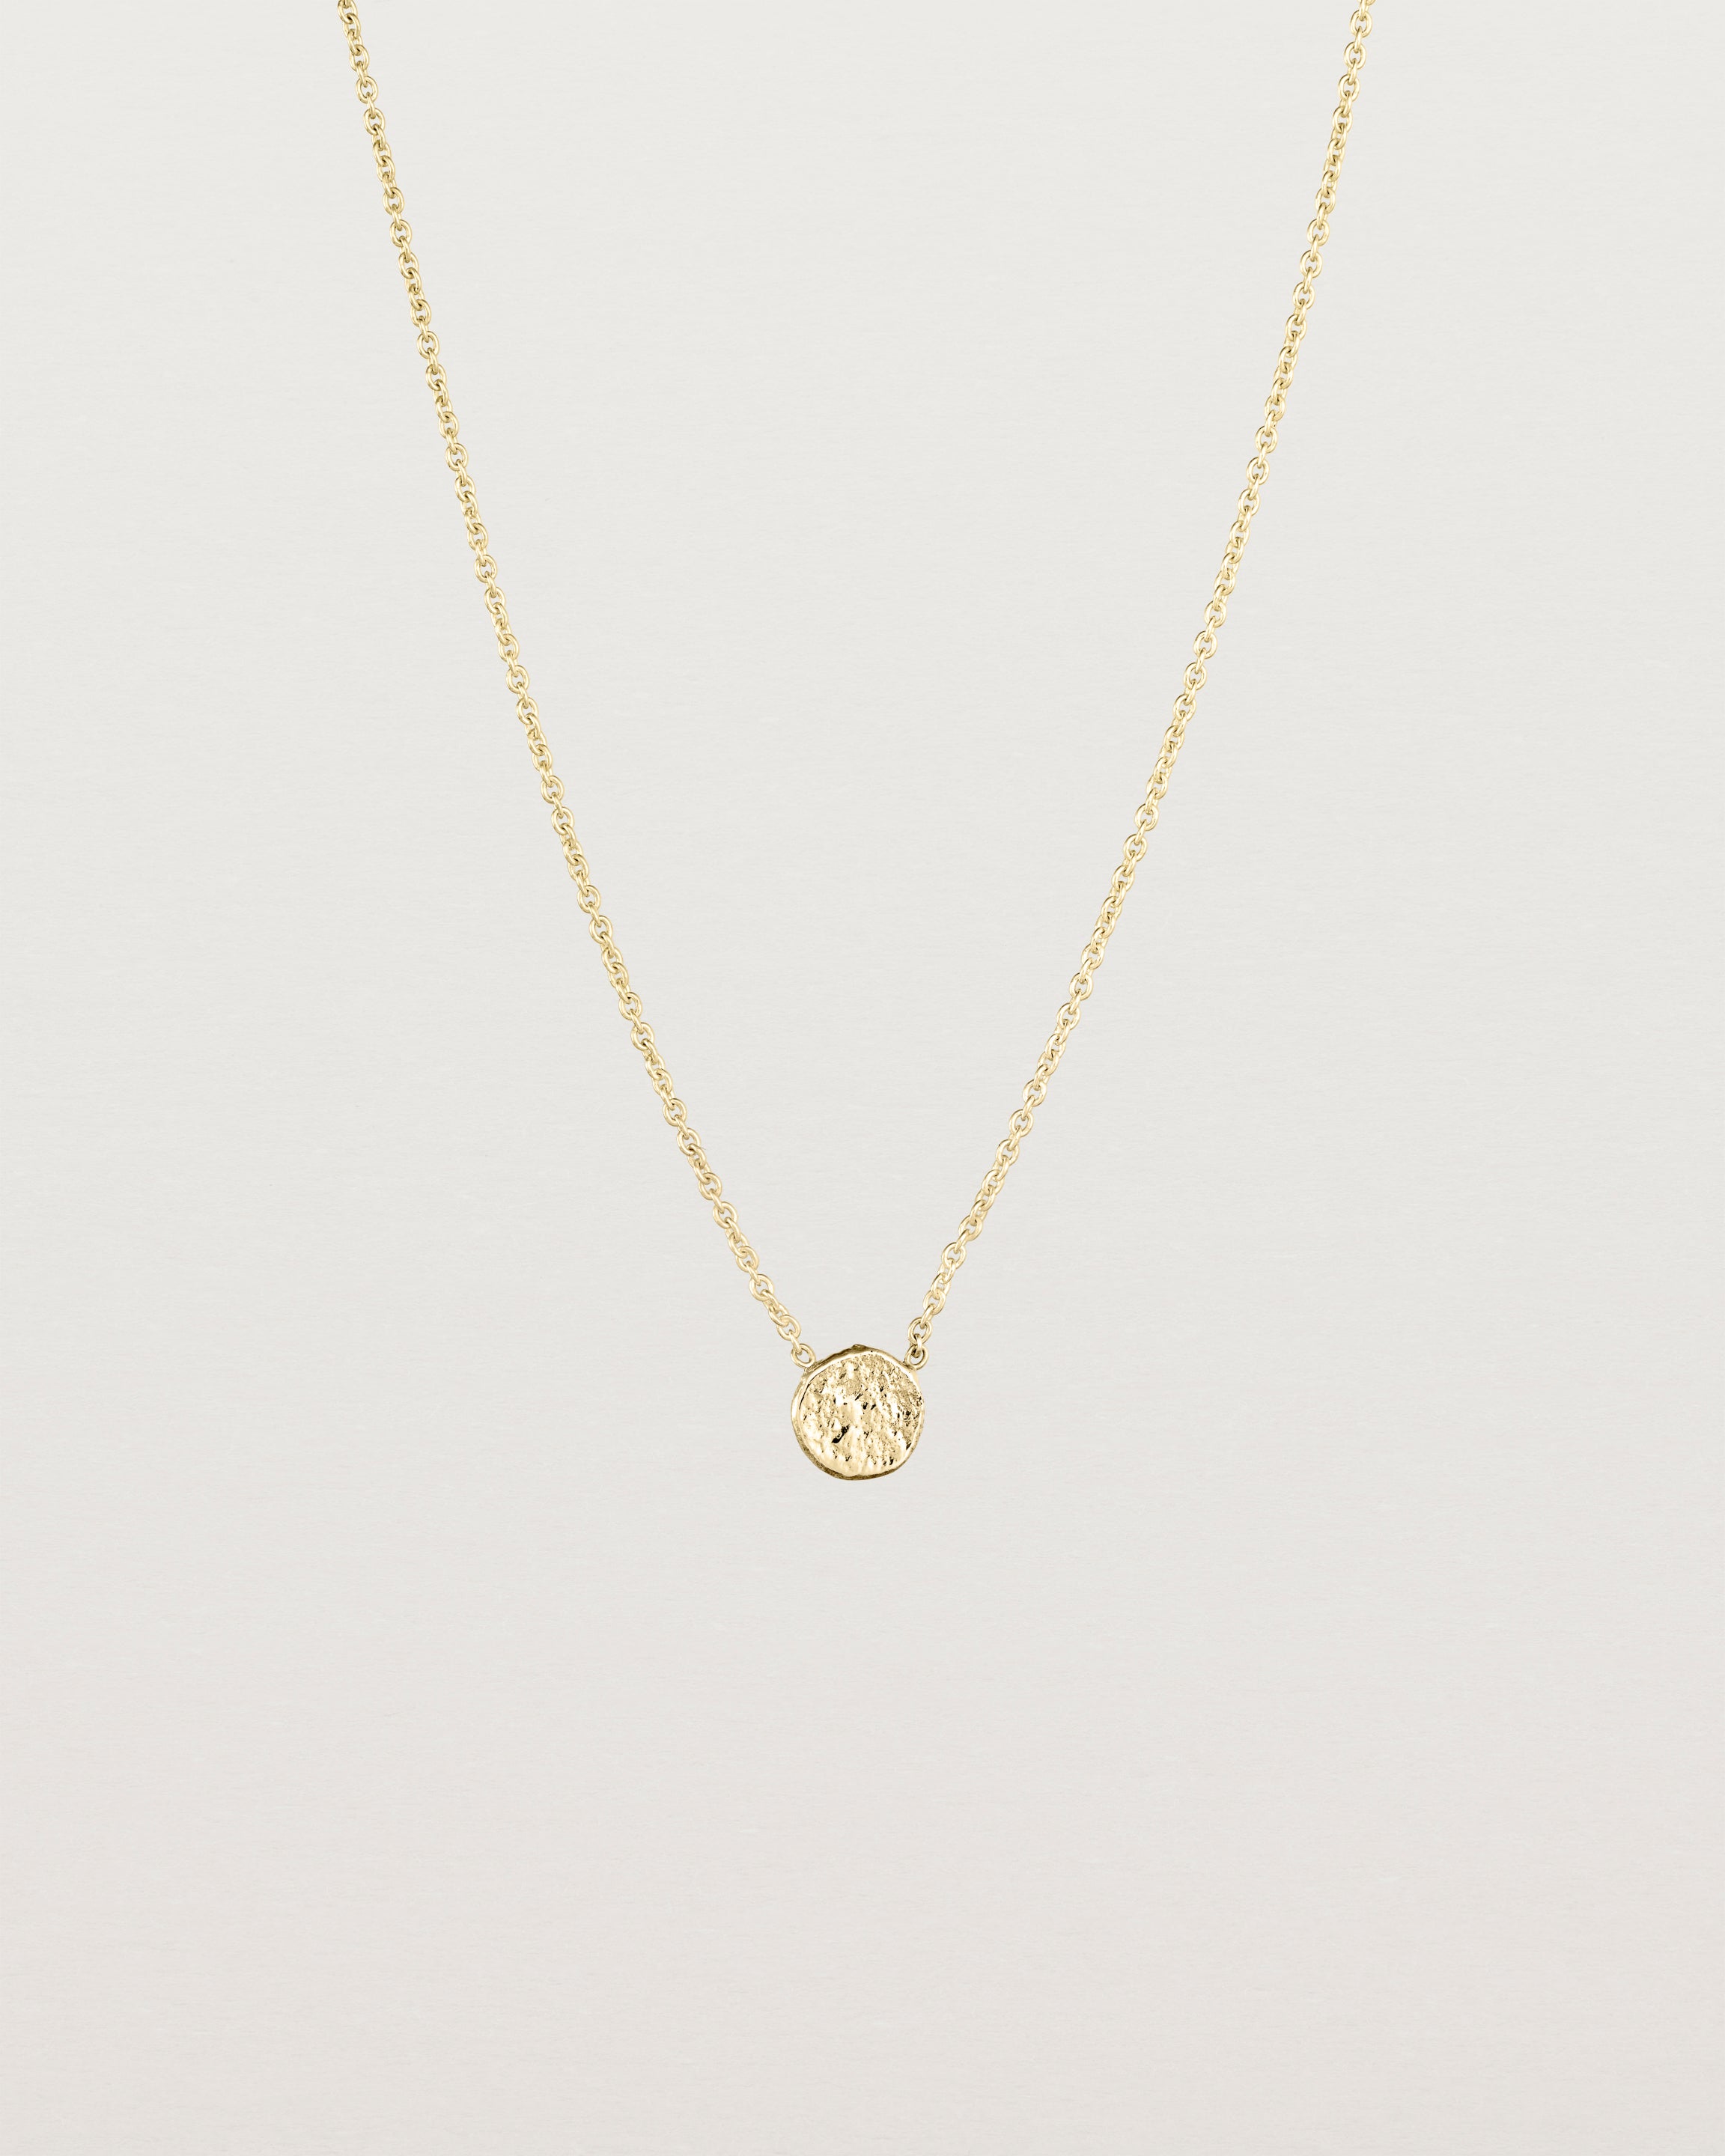 Front view of the Moon Necklace in yellow gold.